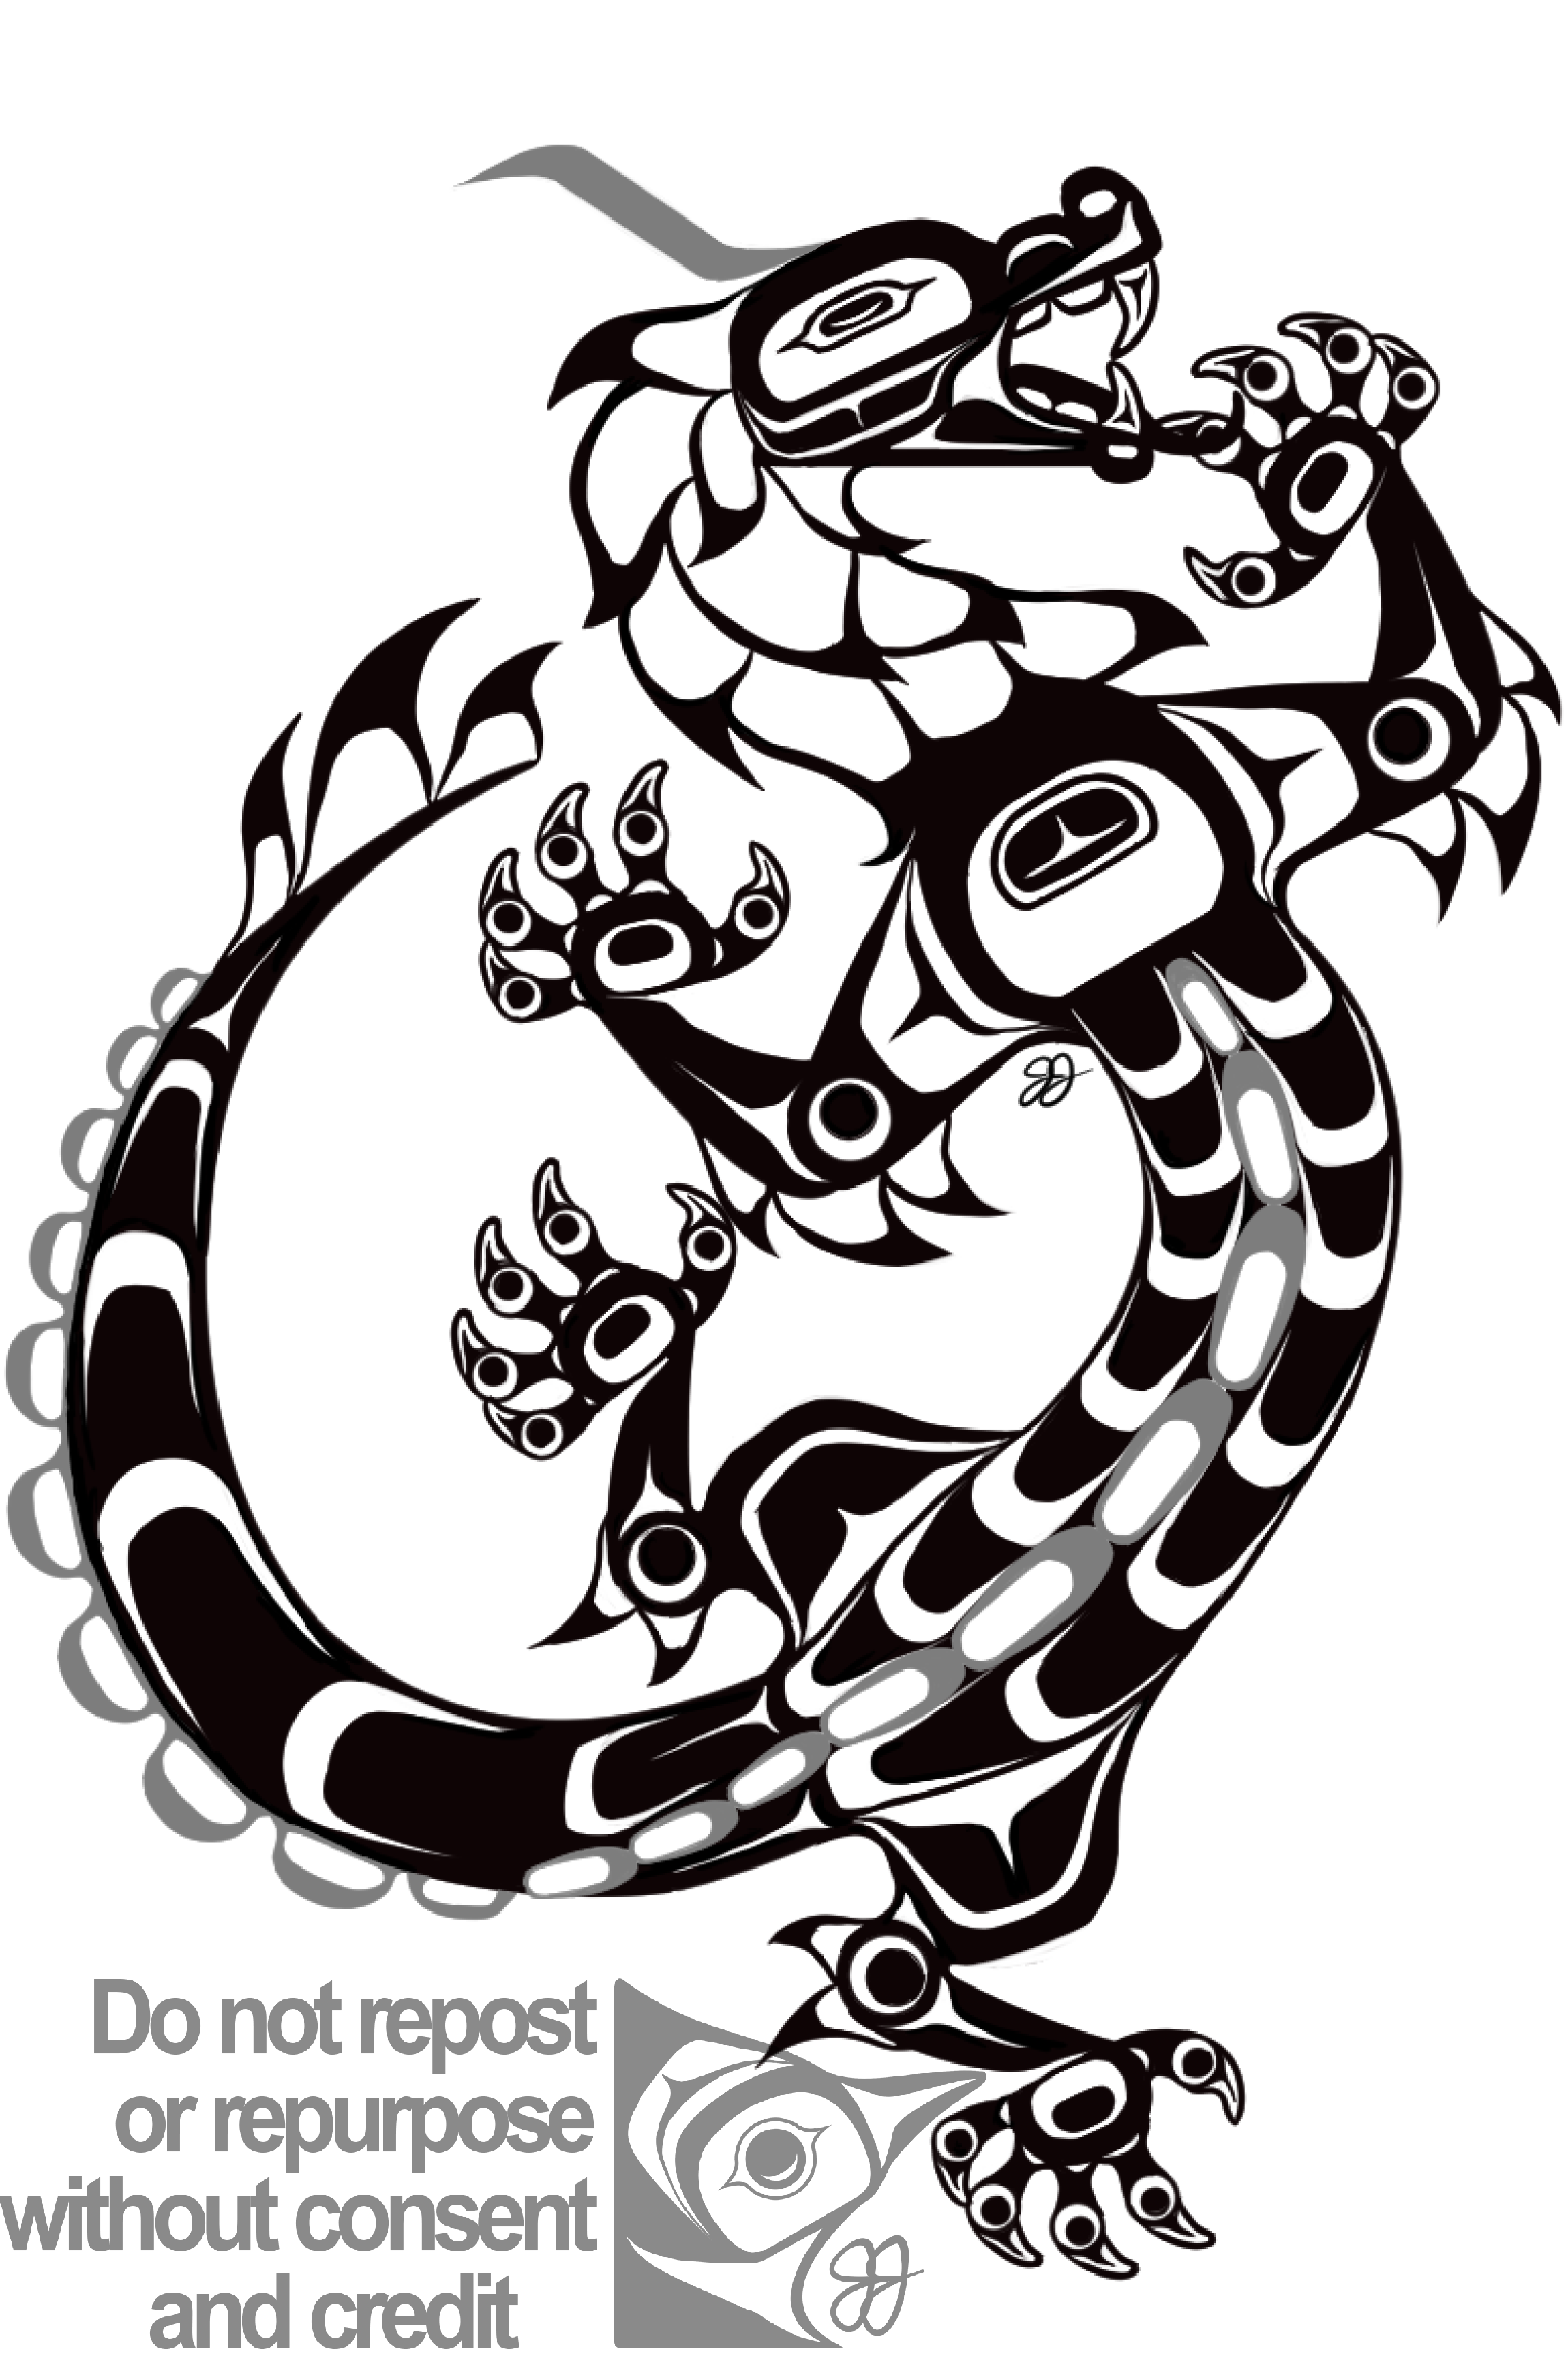 wood dragon formline - greyscale - watermarked.png